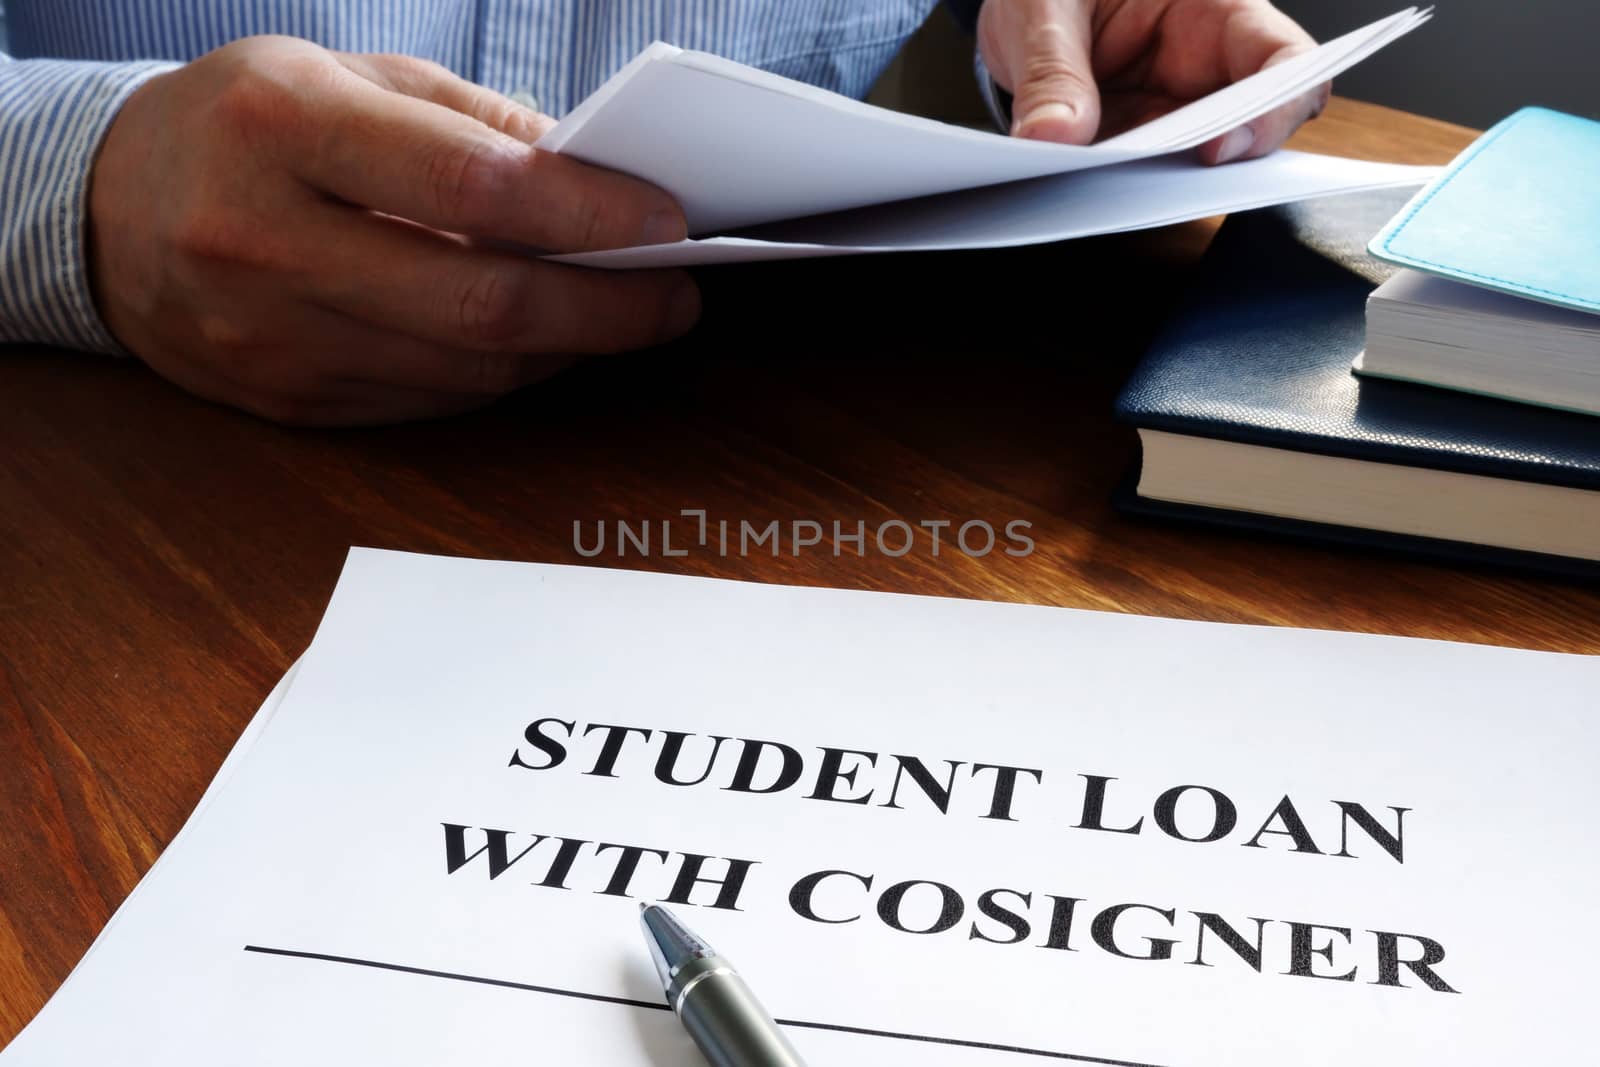 Student loans with cosigner application form and pen.